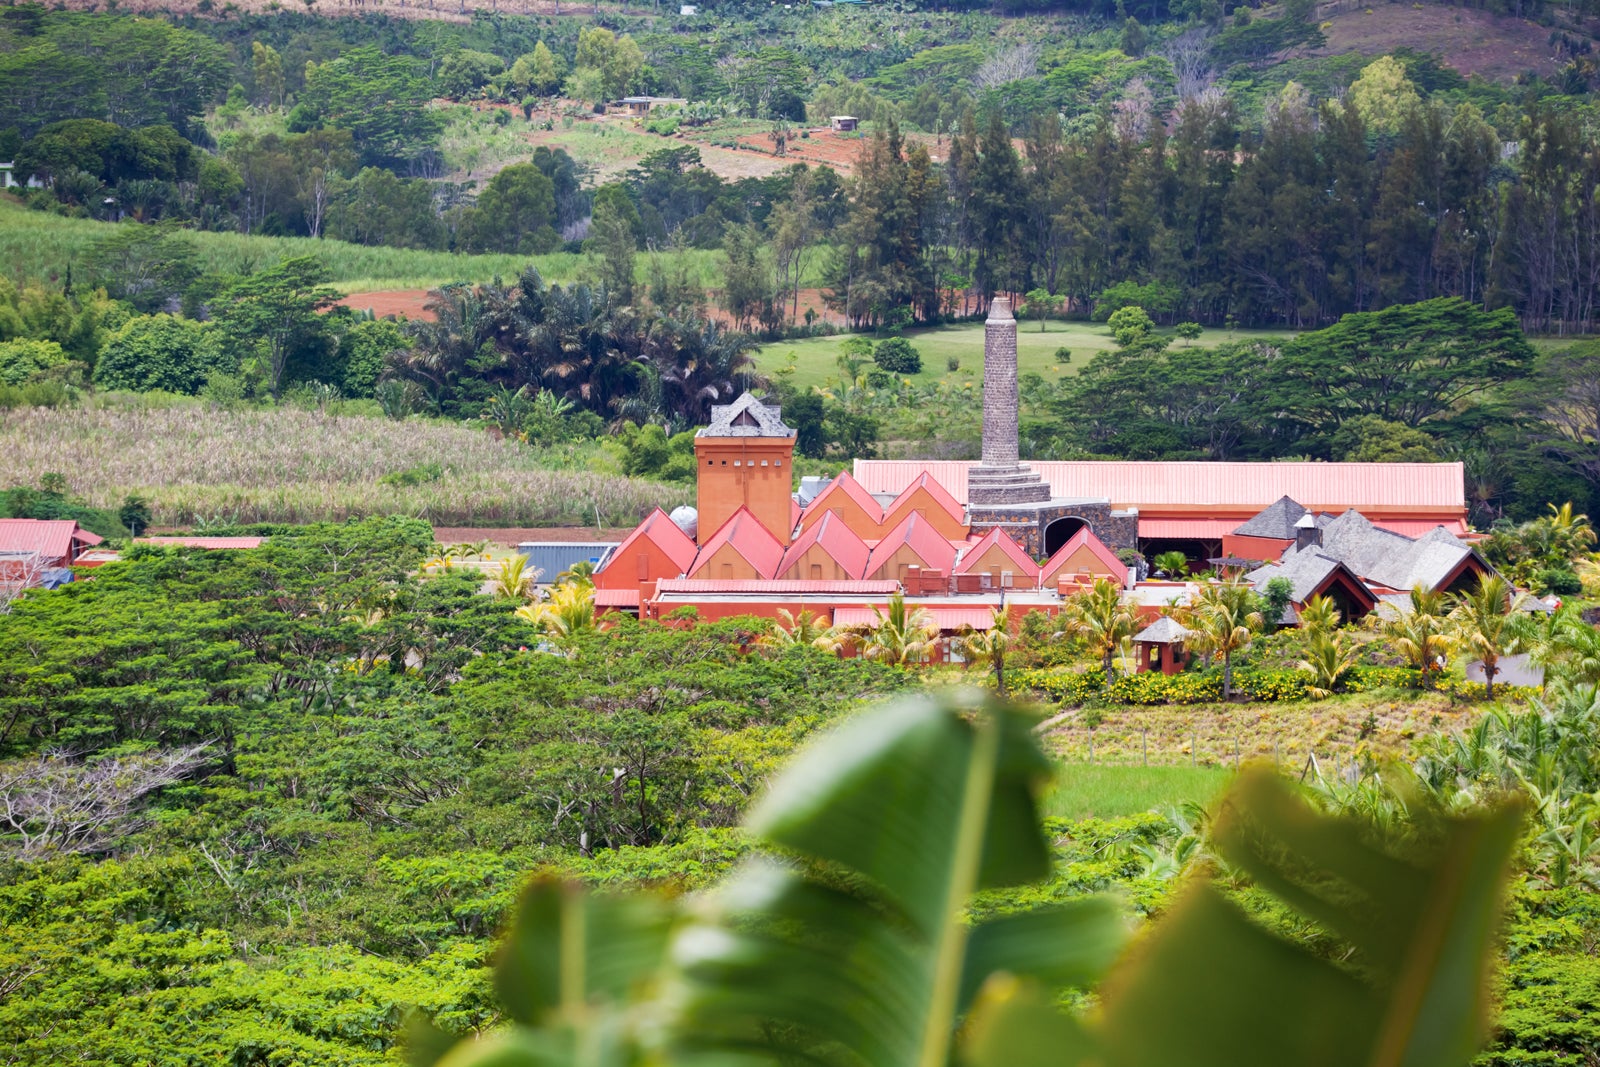 A red-roofed building in the middle of green fields